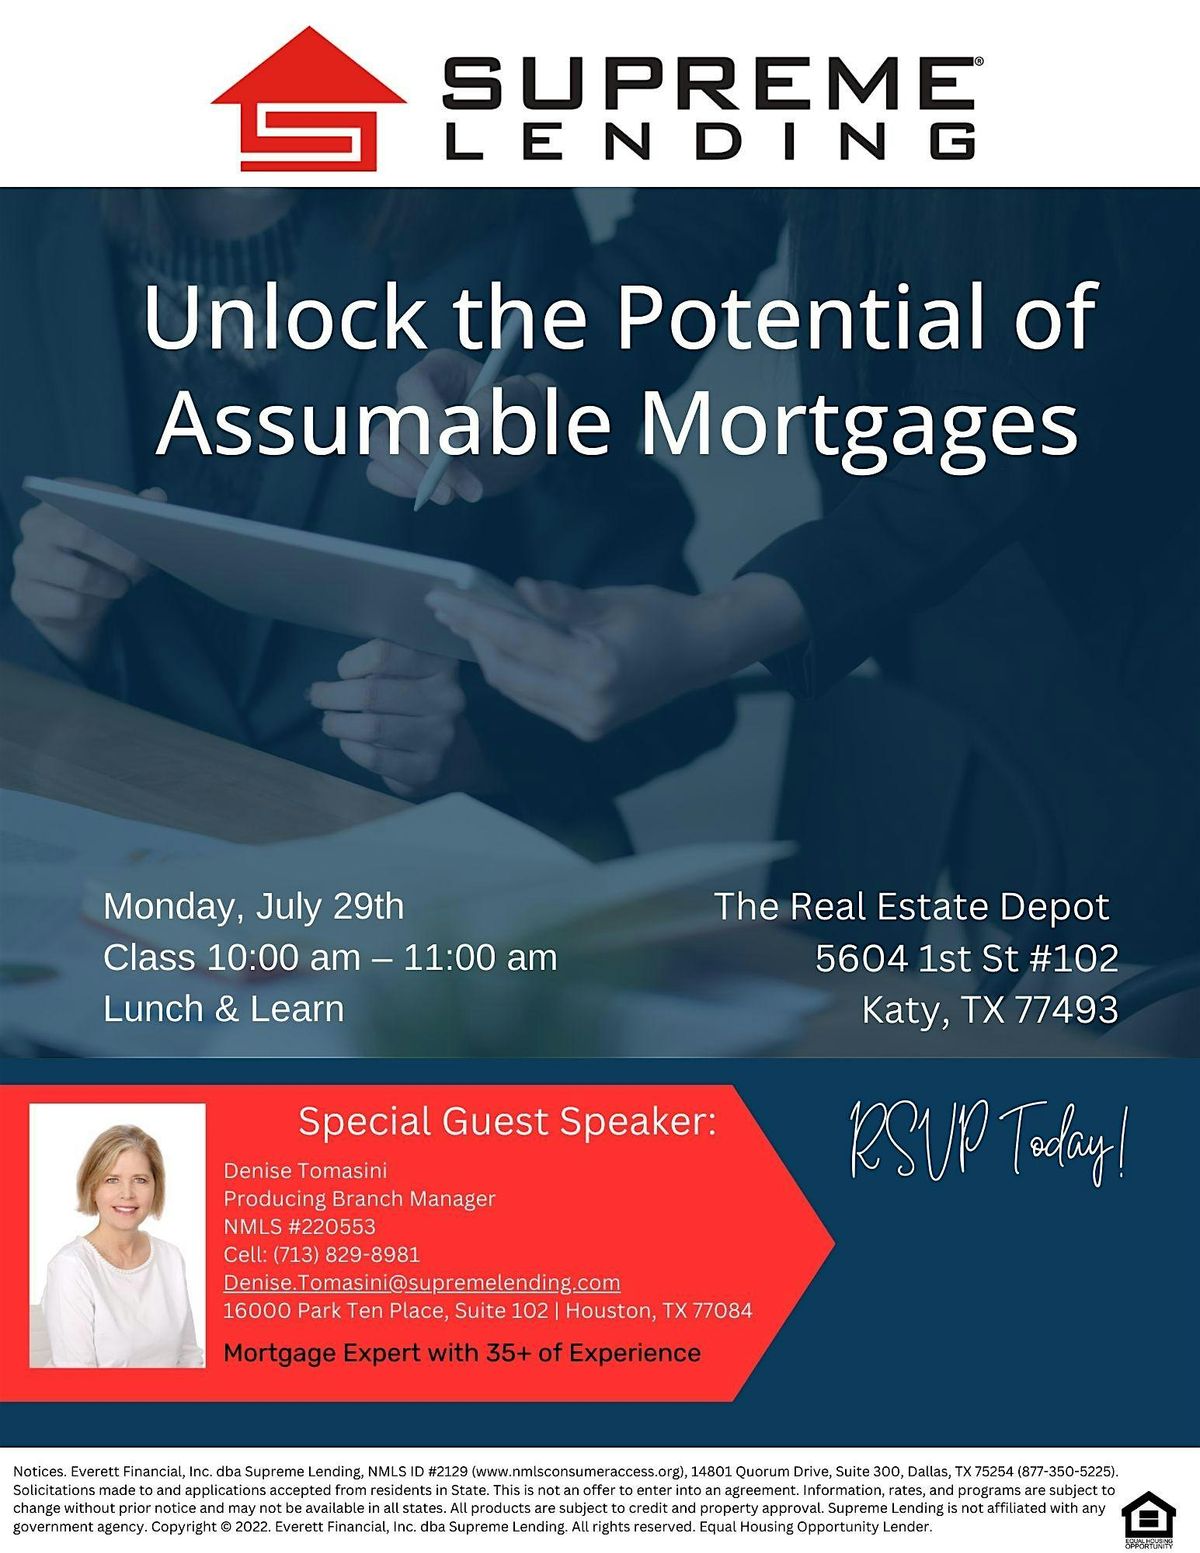 Unlock the Potential of Assumable Mortgages